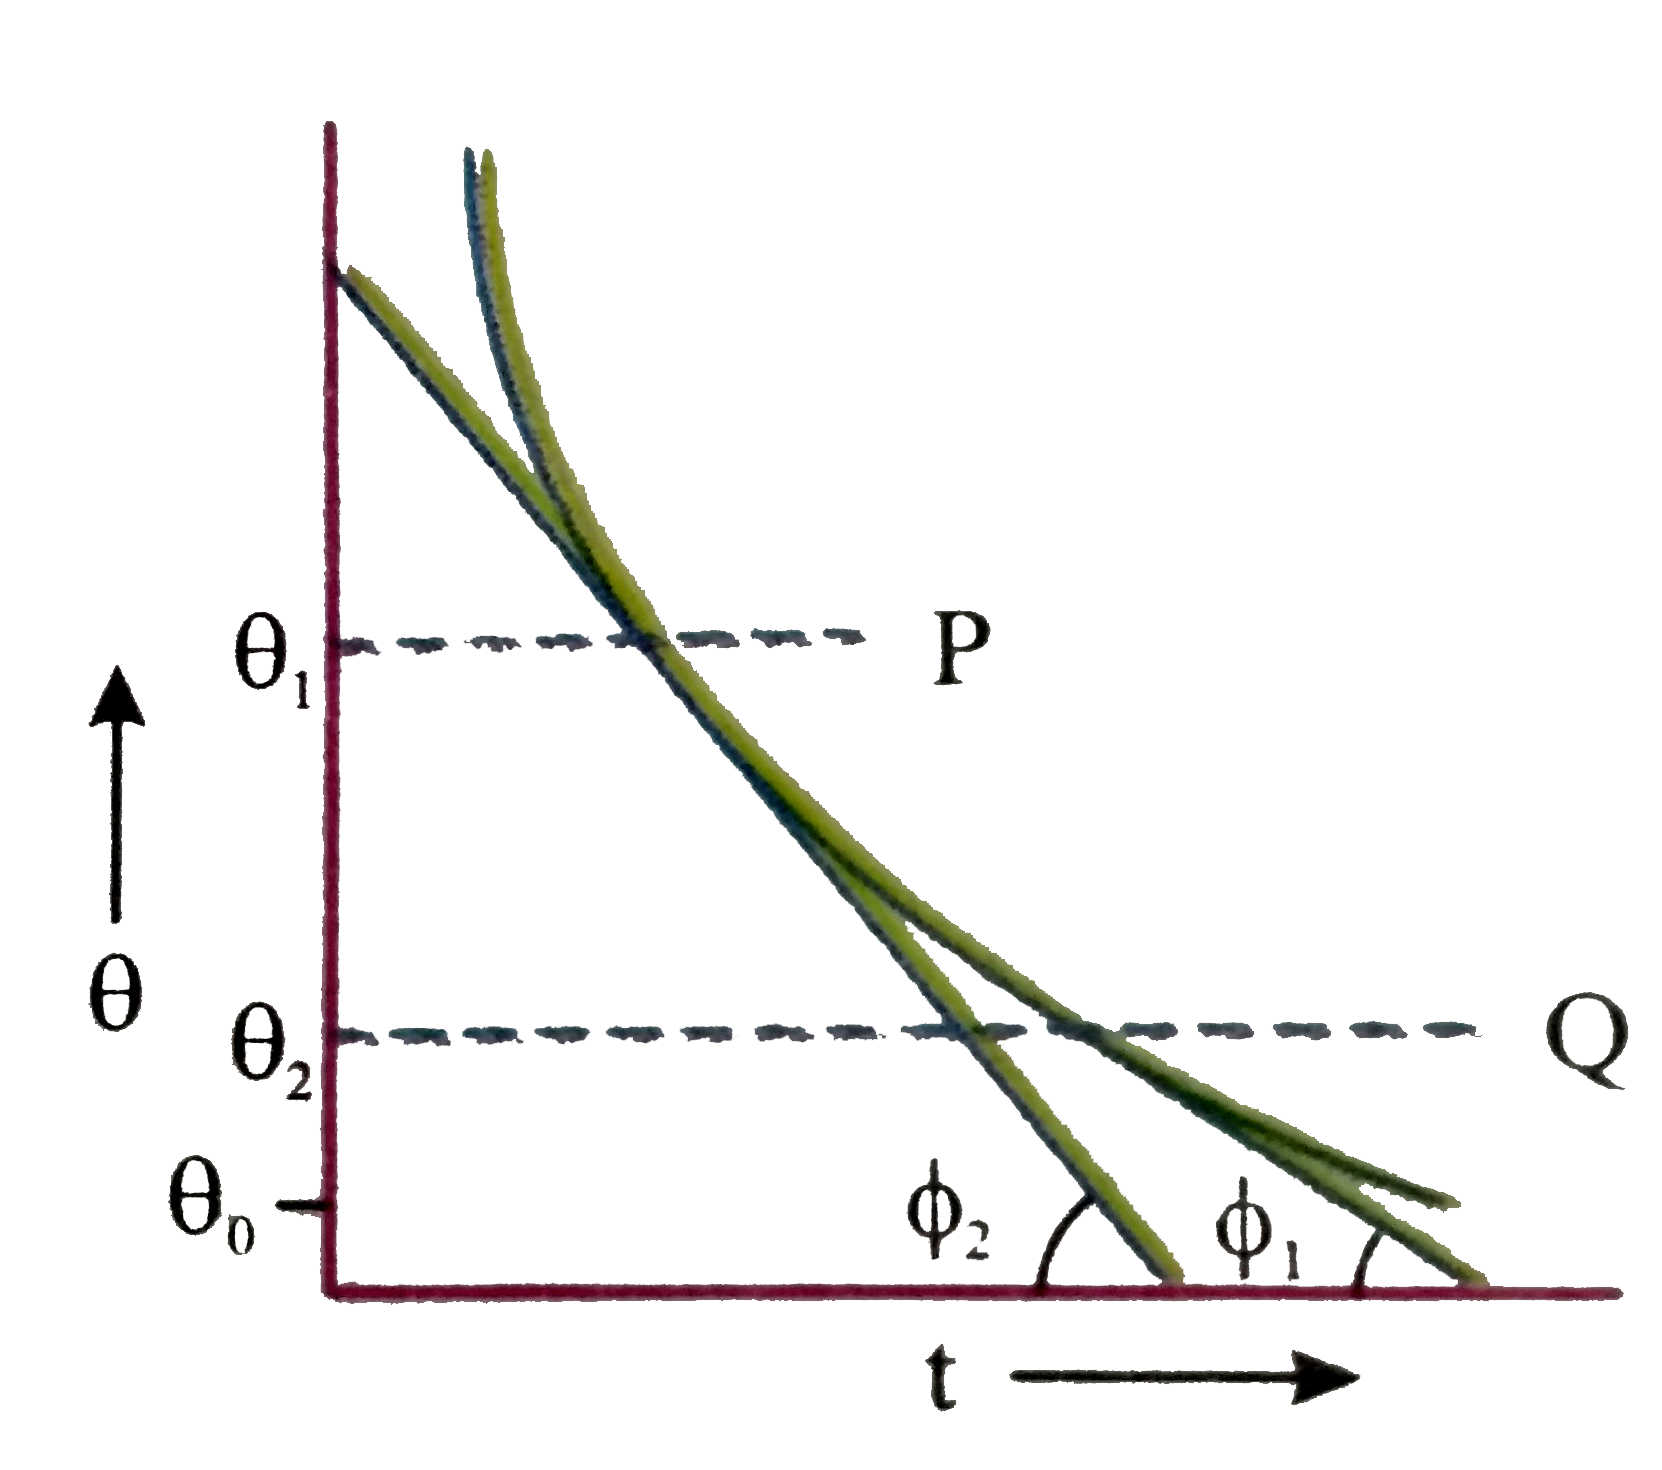 A body cools in a surrounding which is at a constant temperature of theta(0) Assume that it obeys Newton's law of cooling Its temperature theta is plotted against time t Tangents are drawn to the curve at the points P (theta =theta(1)) and Q(theta =theta(2)) These tangents meet the time axis at angle of phi(2) andphi(1) as shown    .